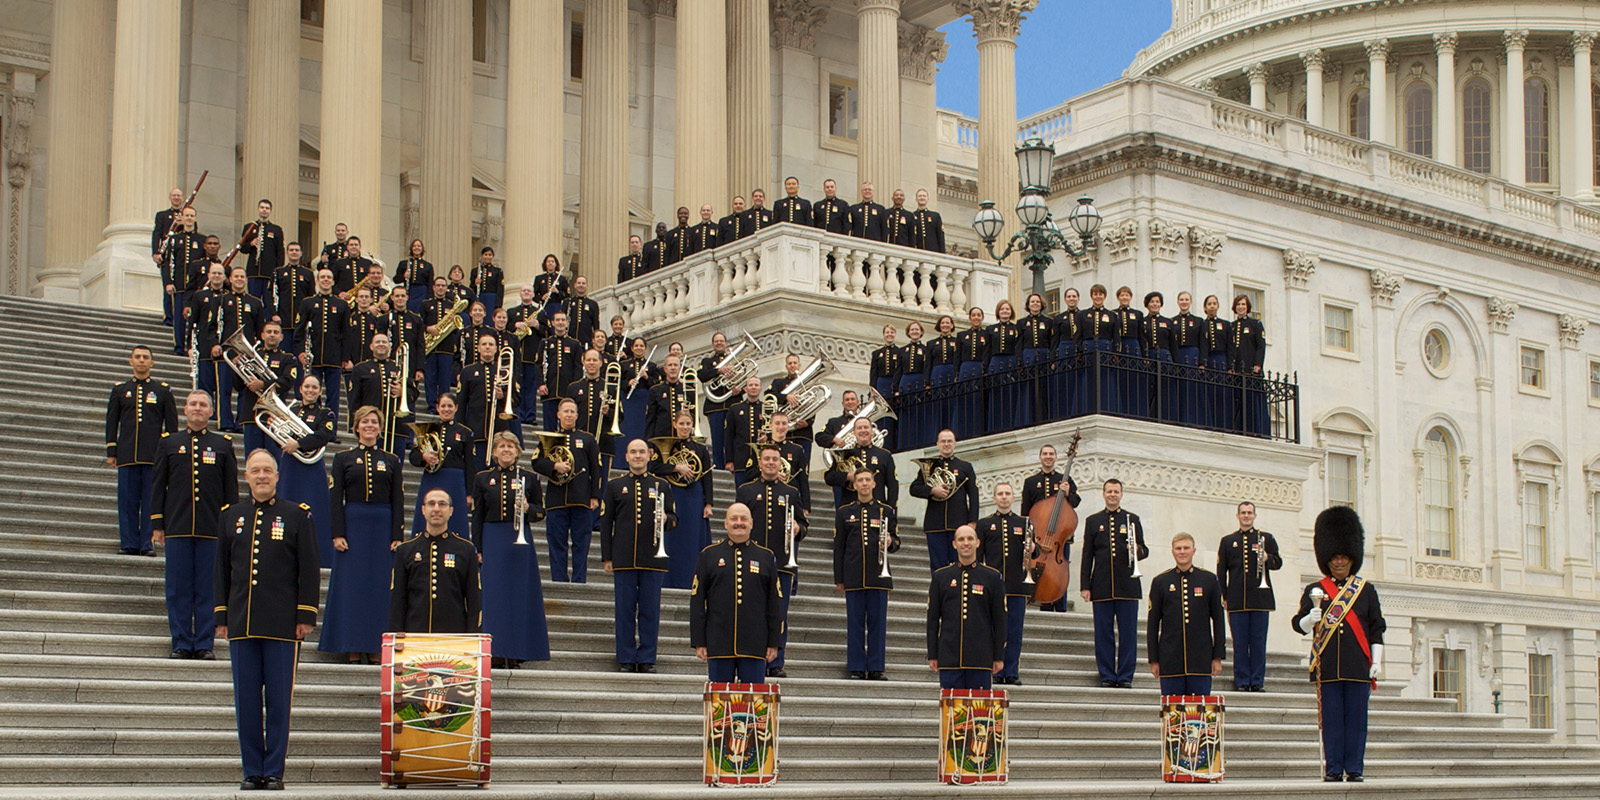 US Army Field Band on the steps of the US Capitol